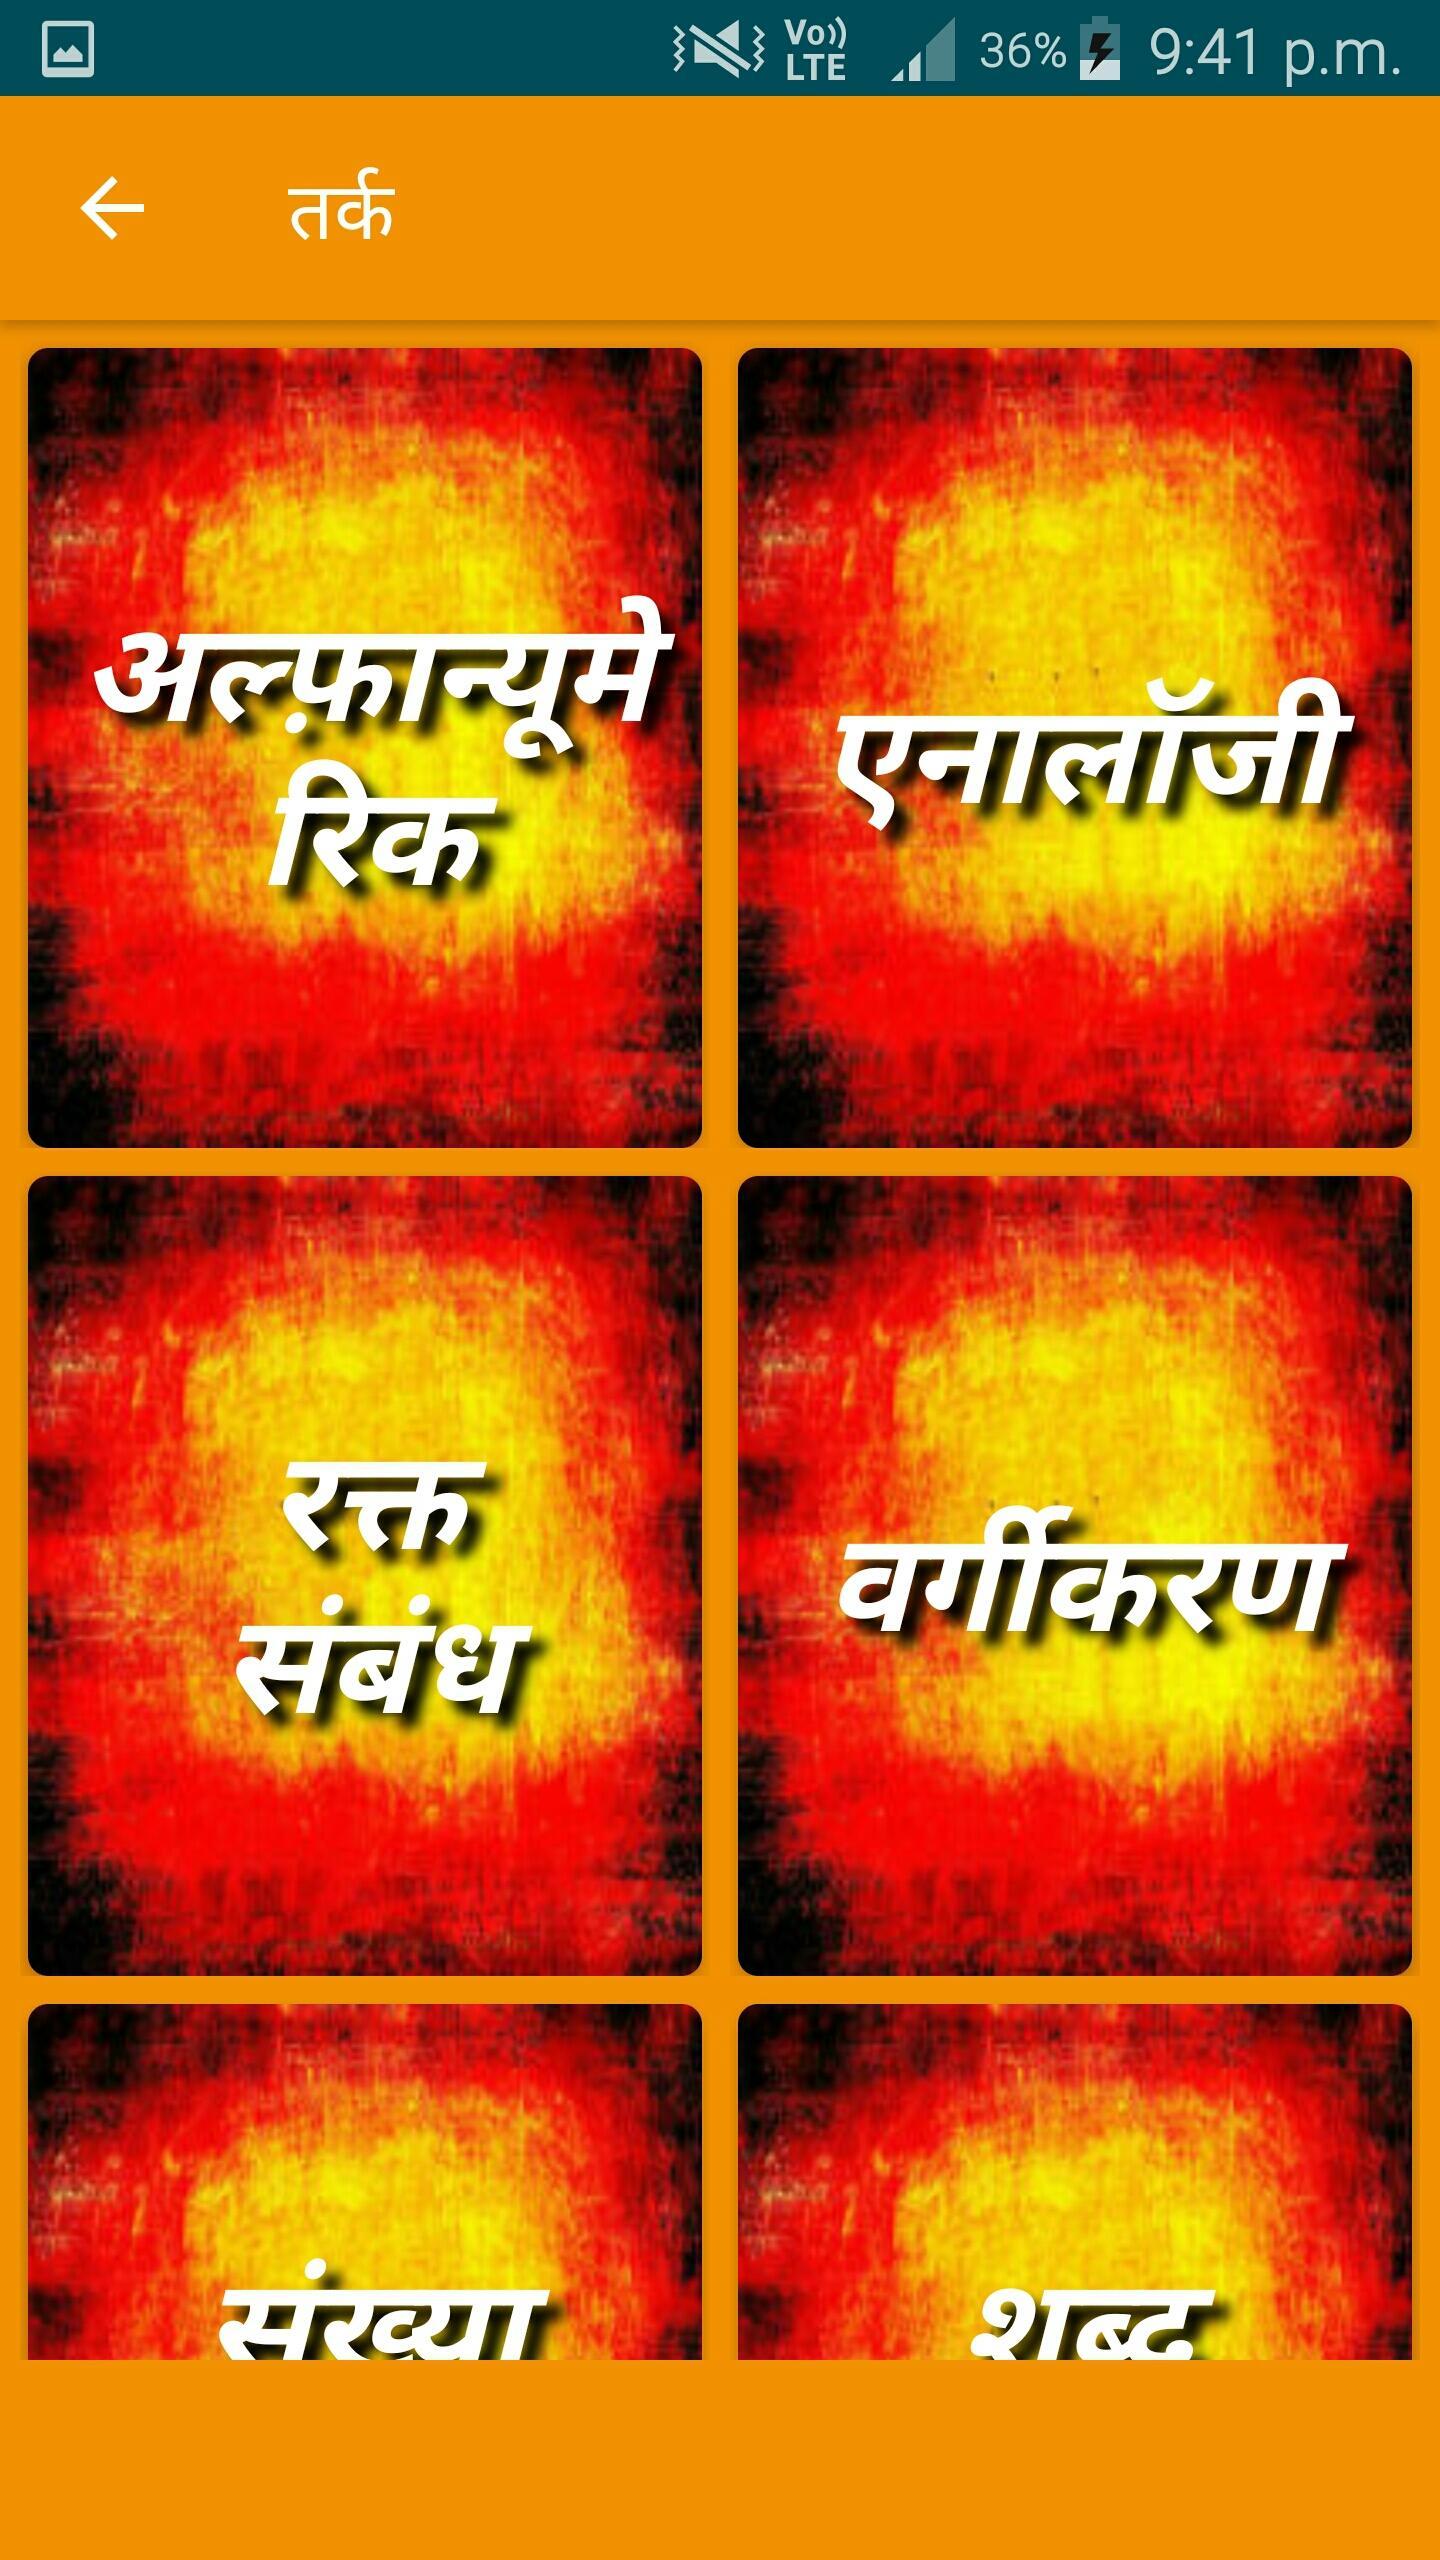 Adhyan Gk Question Test In Hindi Objective Gk For Android Apk